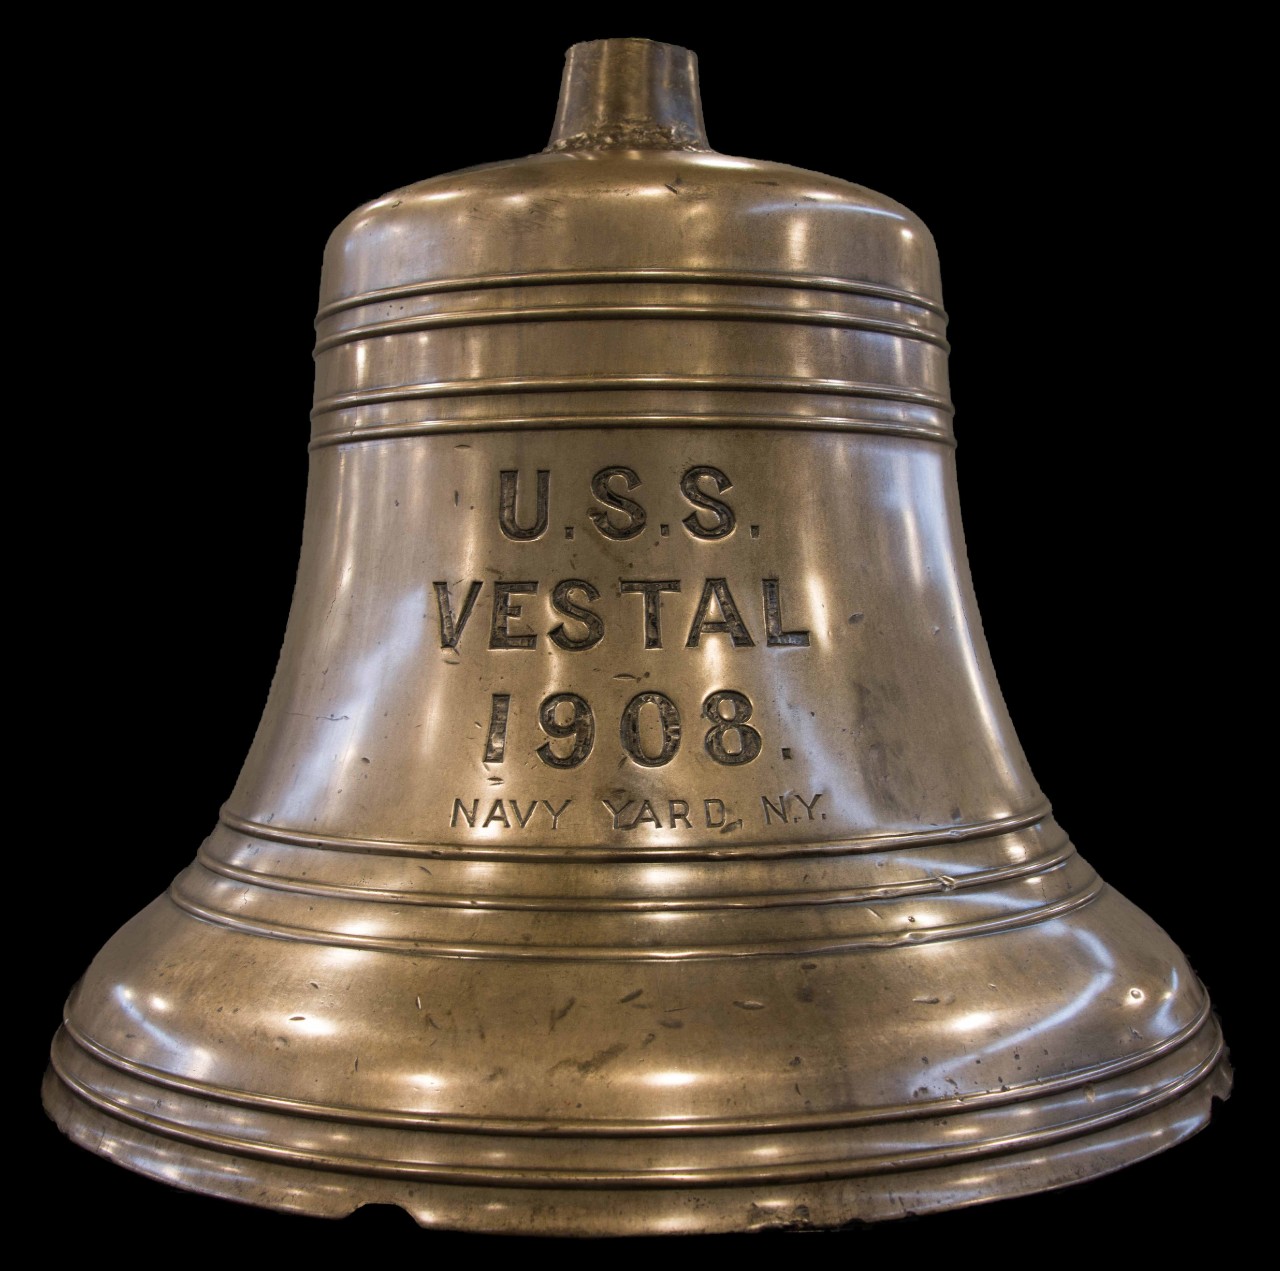 Bell with concentric circles on exterior etched USS Vestal 1908 Navy Yard, NY